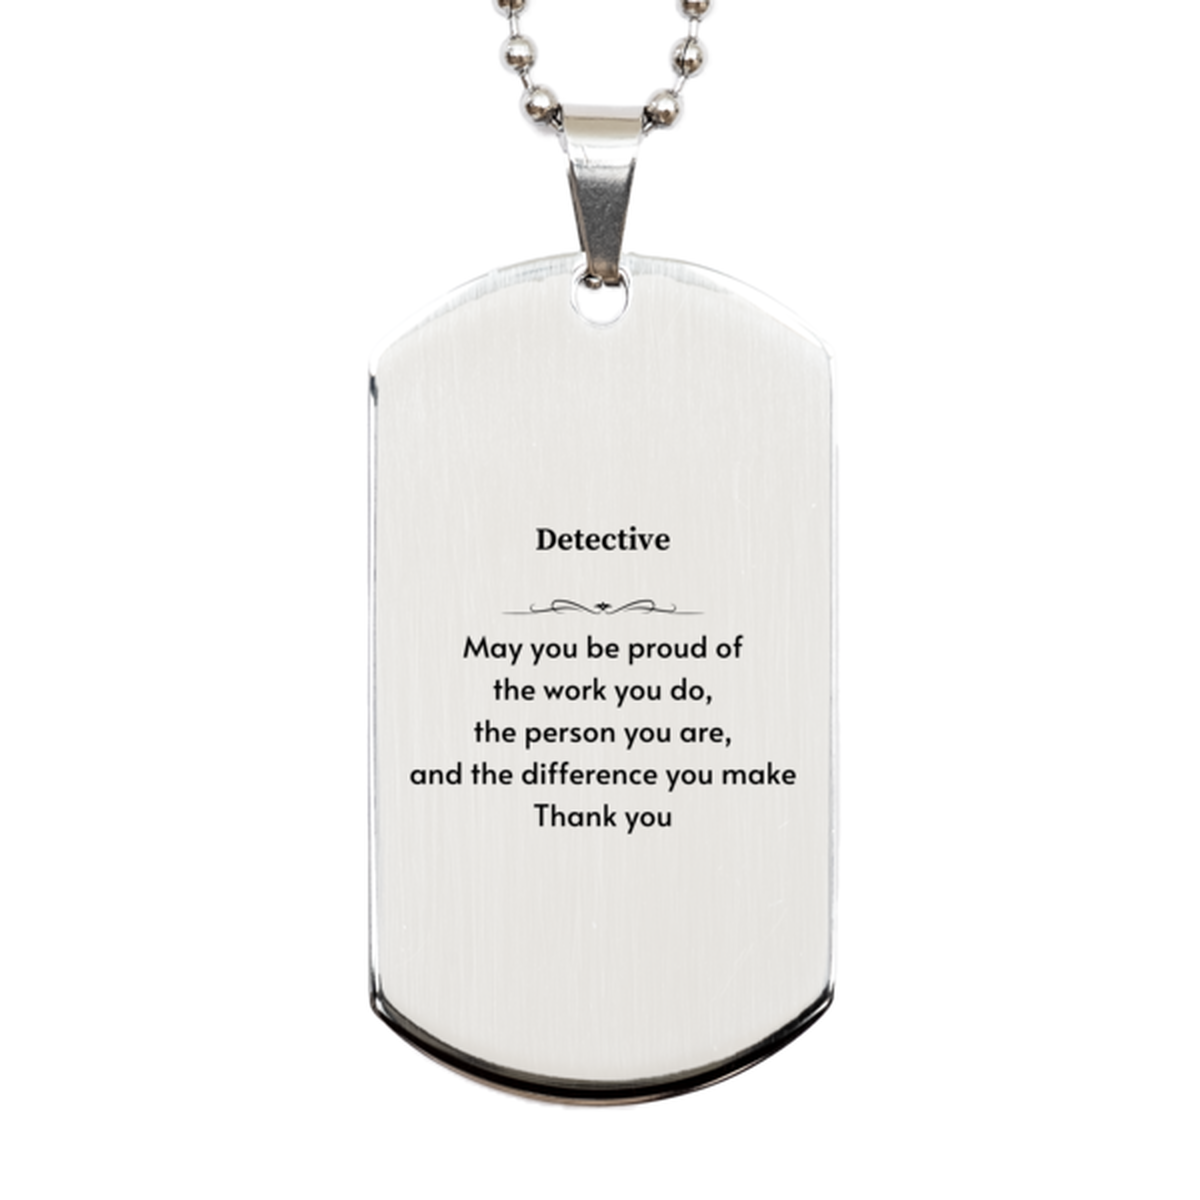 Heartwarming Silver Dog Tag Retirement Coworkers Gifts for Detective, Detective May You be proud of the work you do, the person you are Gifts for Boss Men Women Friends